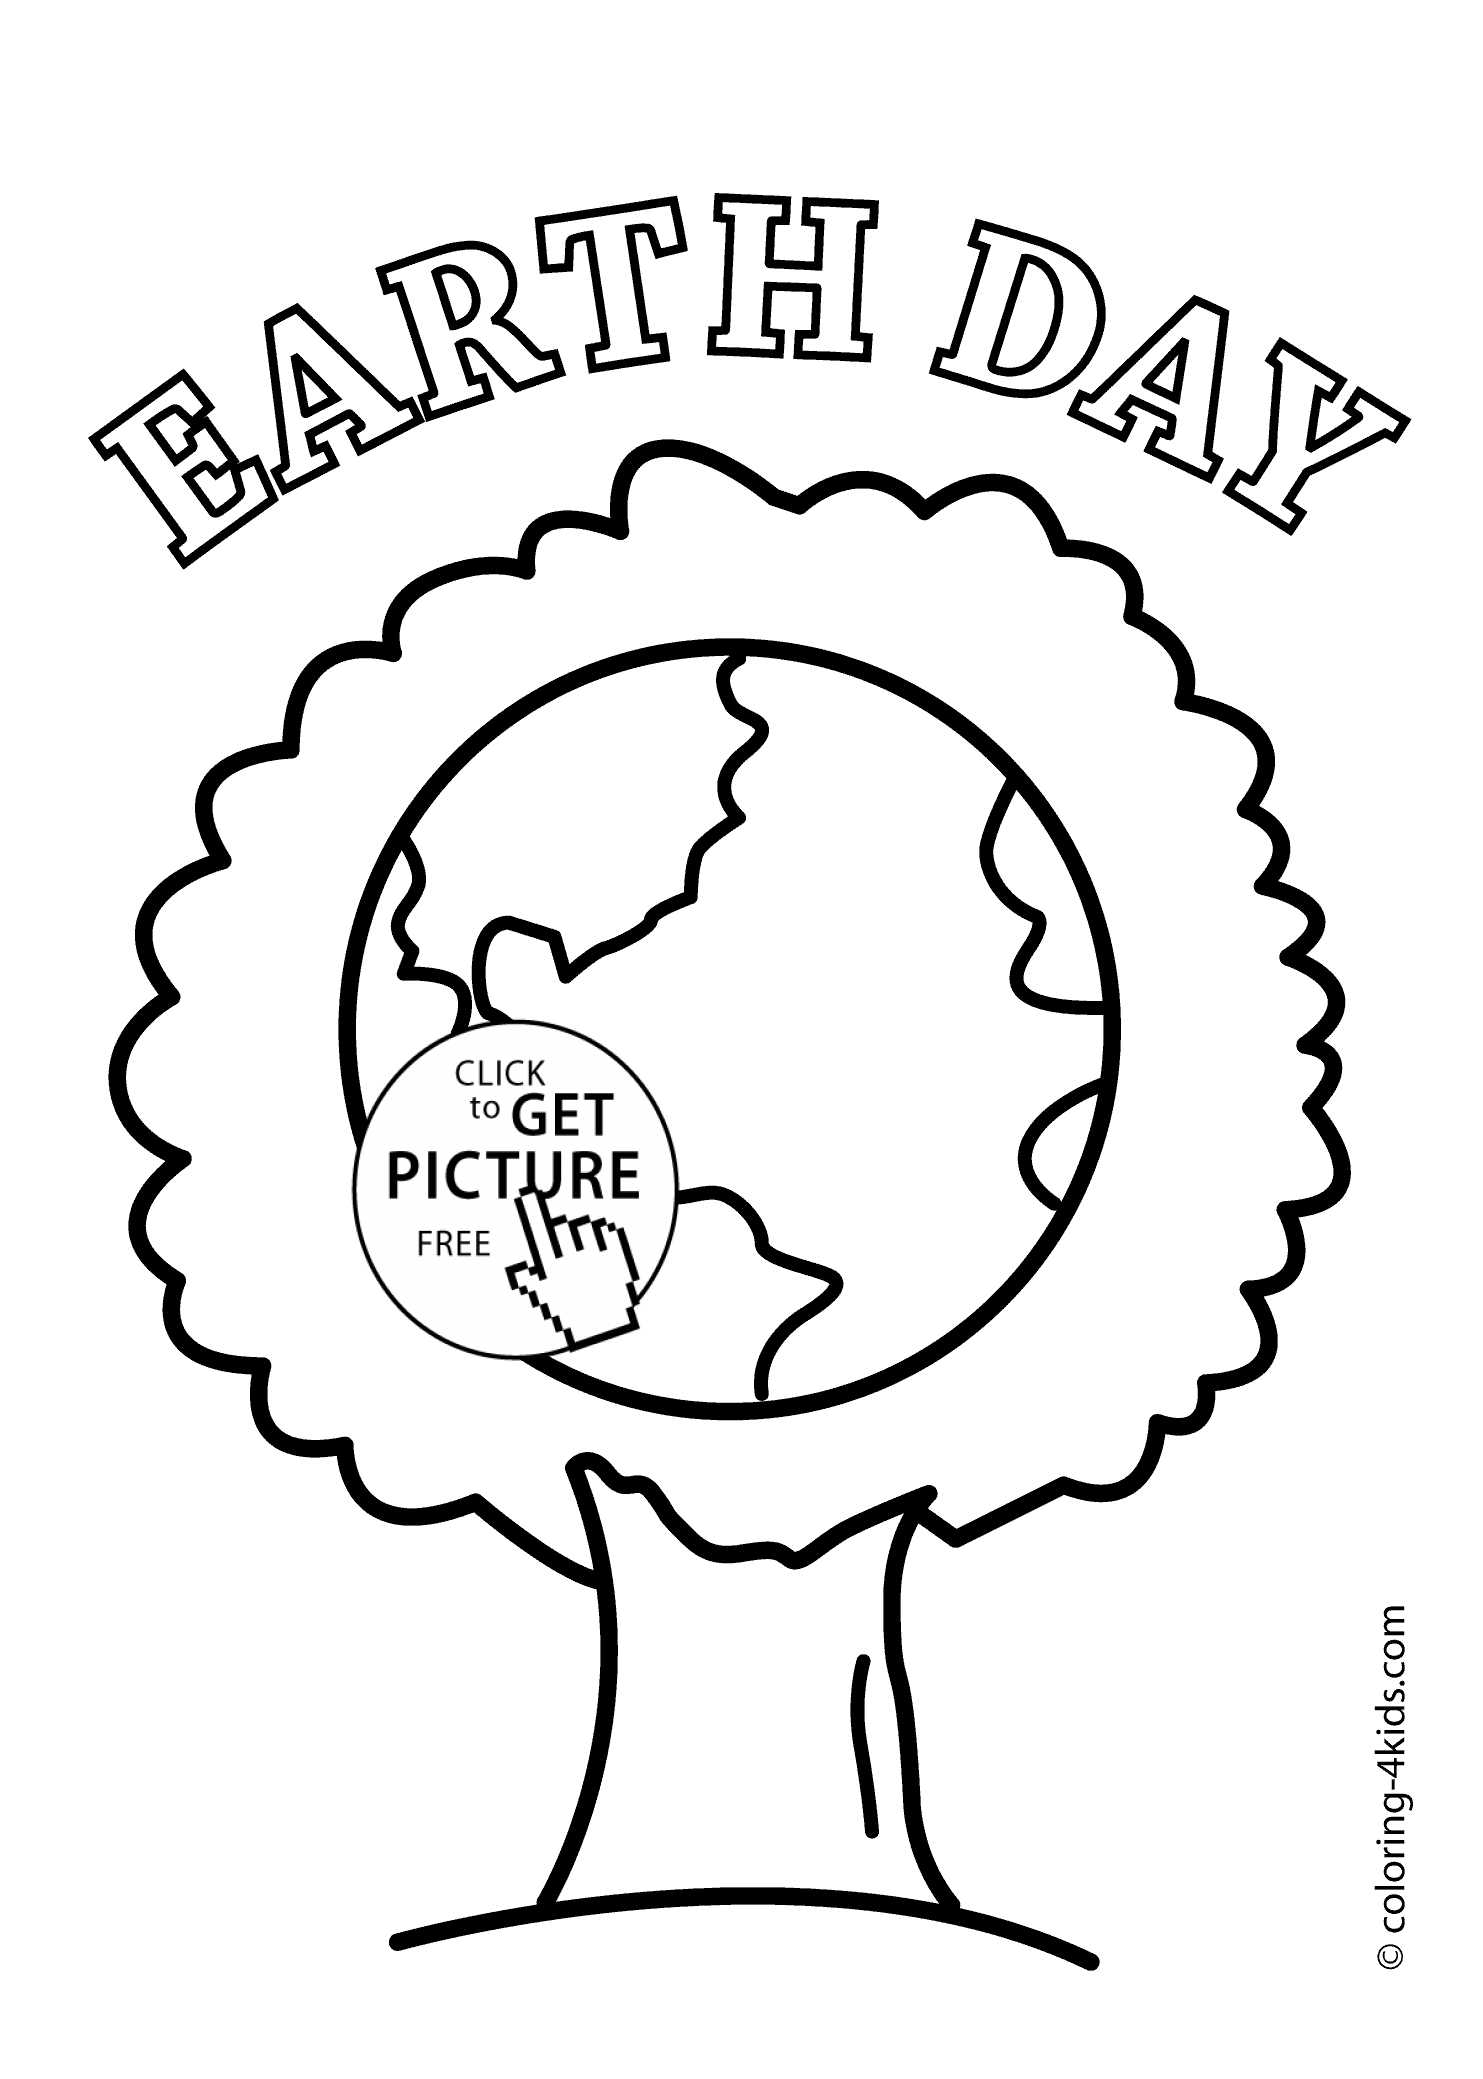 Free Printable Earth Day Coloring Pages And Activities Earth Day Tree Coloring Pages For Kids Printable Free Coloing